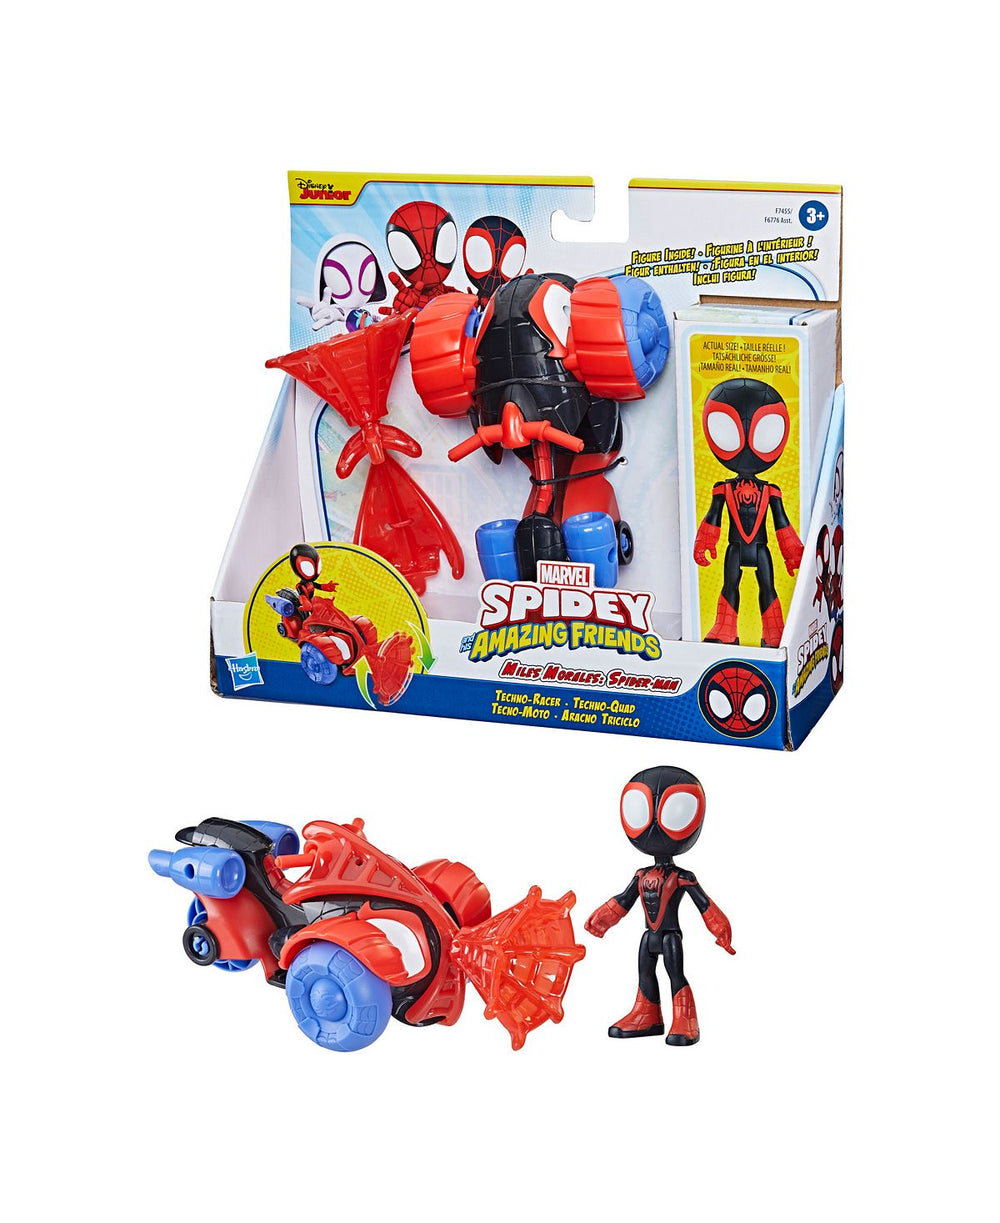 Marvel Spidey and His Amazing Friends Miles Morales Spider-Man Techno Racer Set